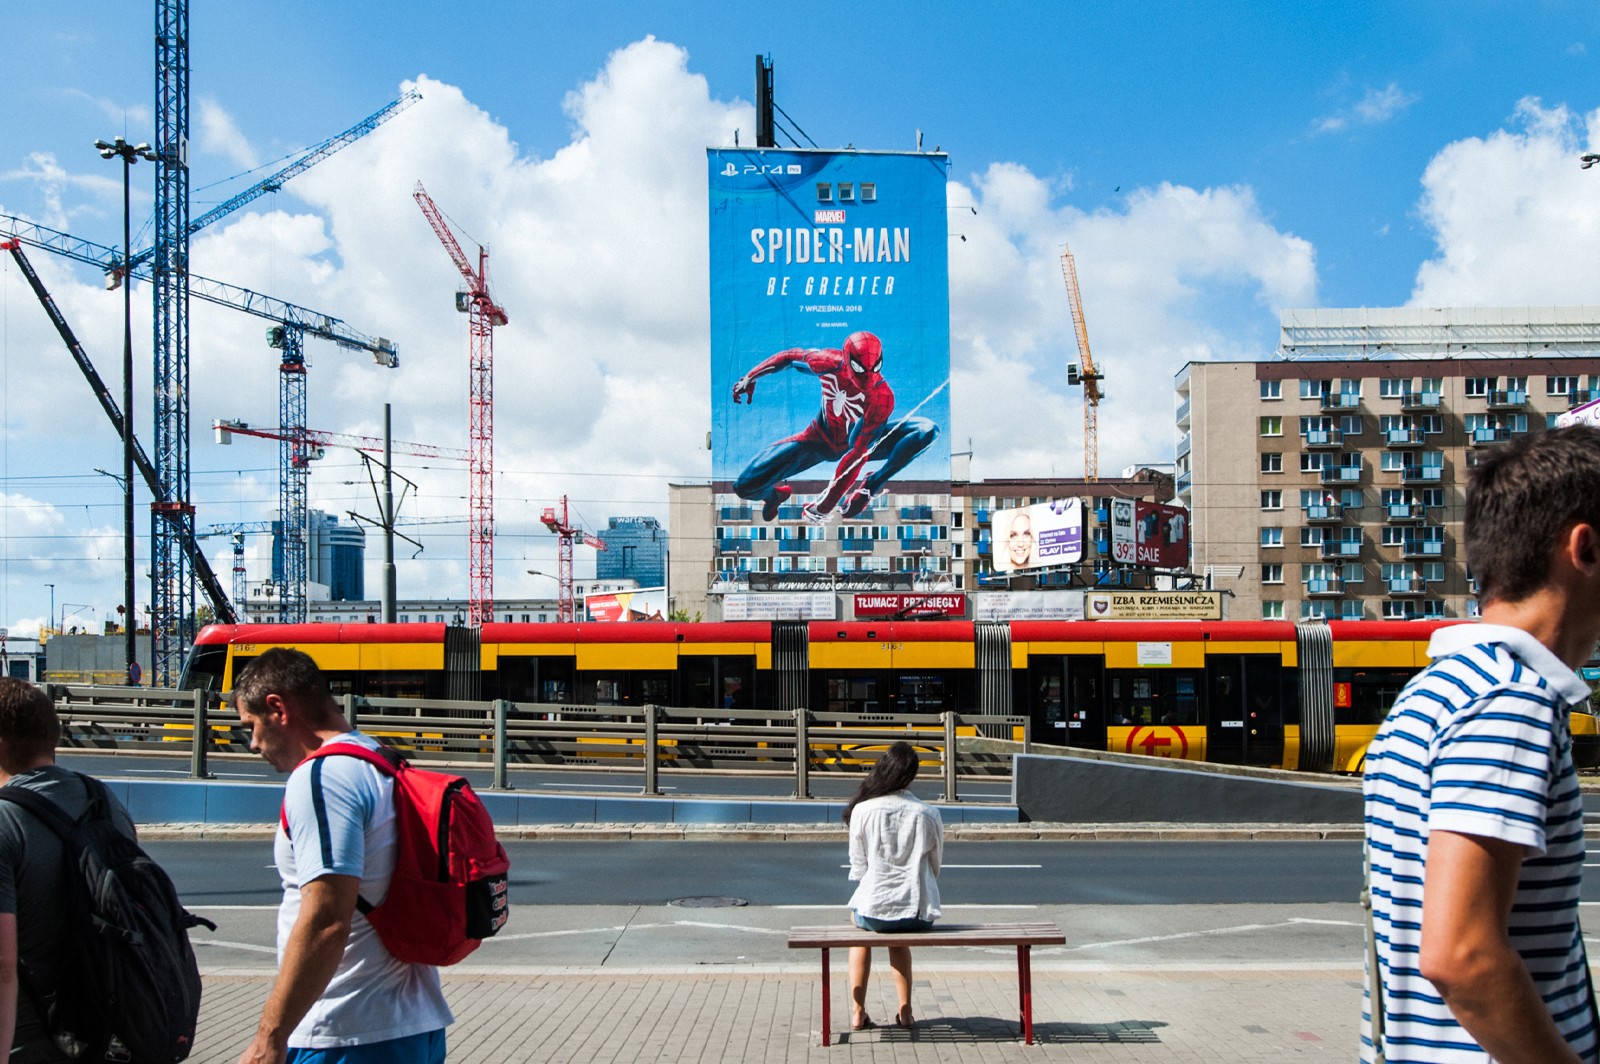 spiderman be greater on chmielna street in Warsaw | SPIDER-MAN BE GREATER | Portfolio